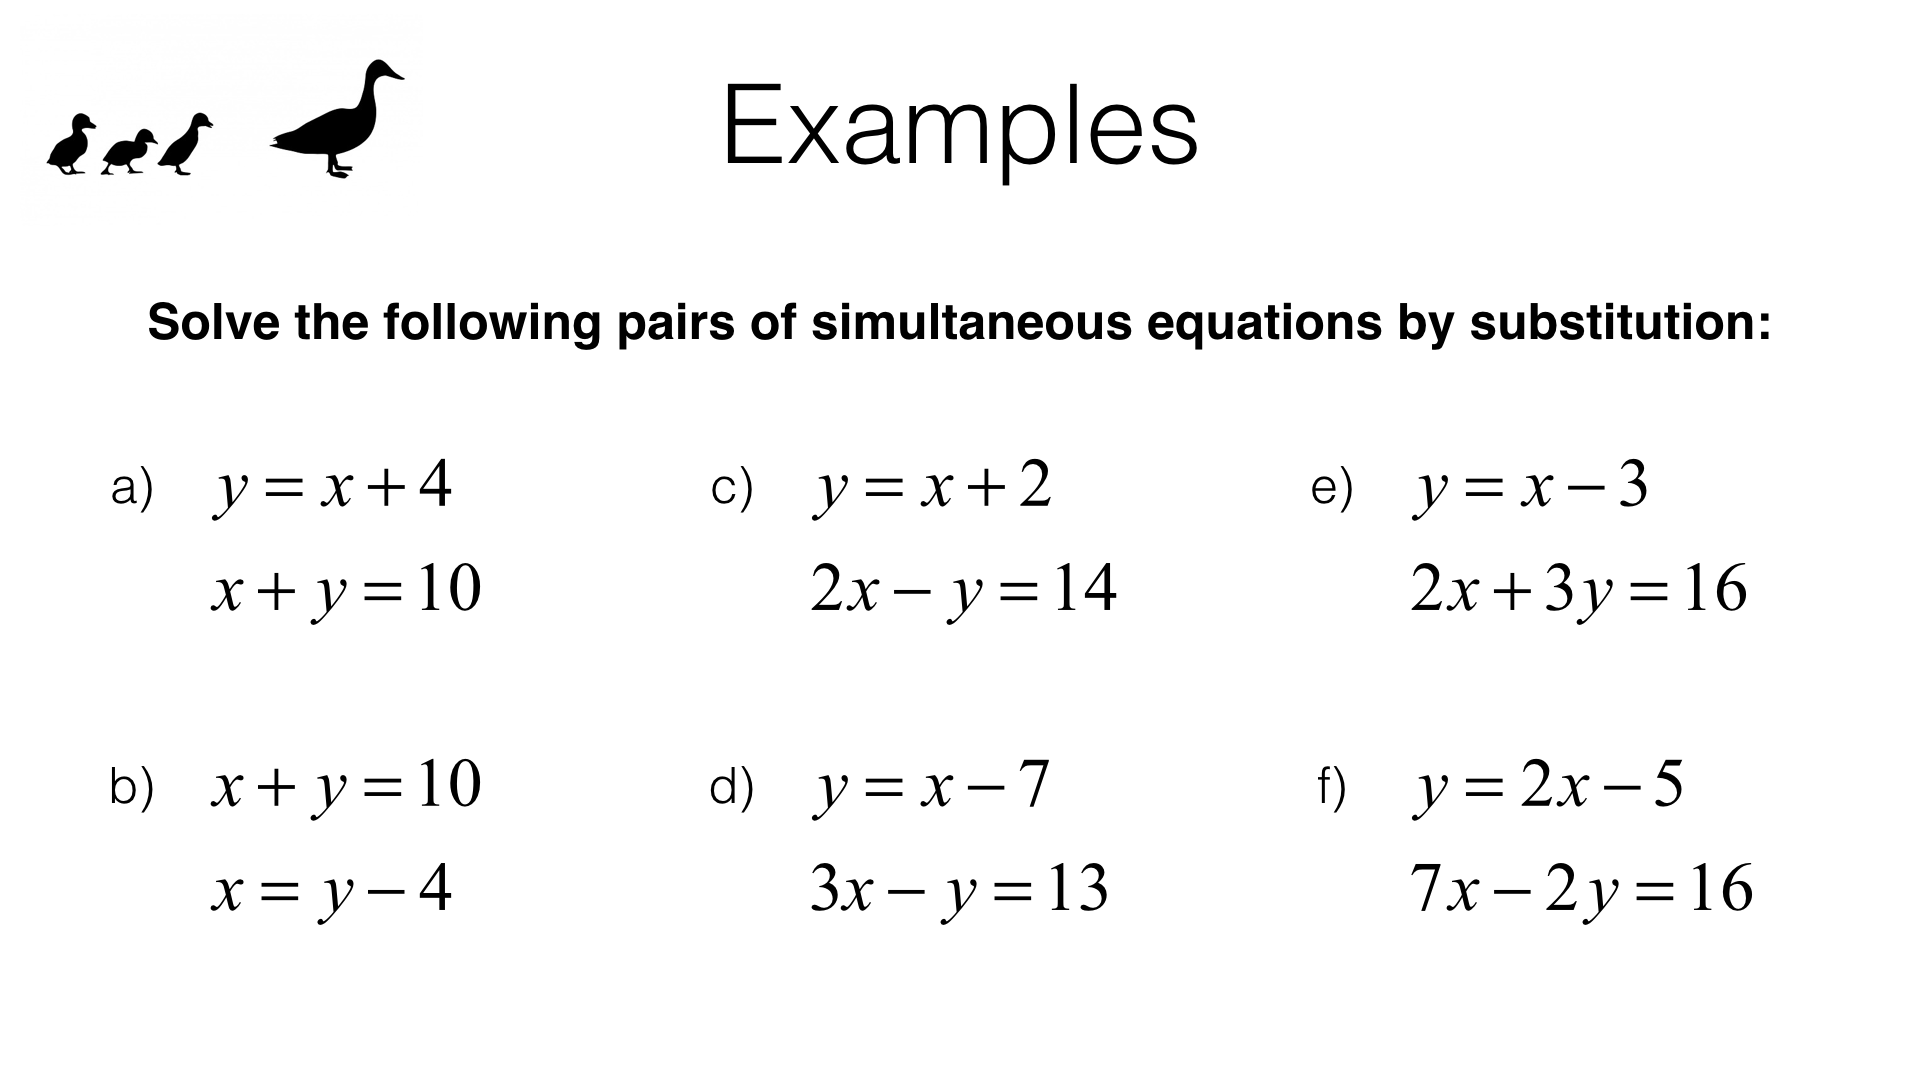 elimination-systems-of-equations-worksheet-solving-linear-equations-using-gaussian-elimination